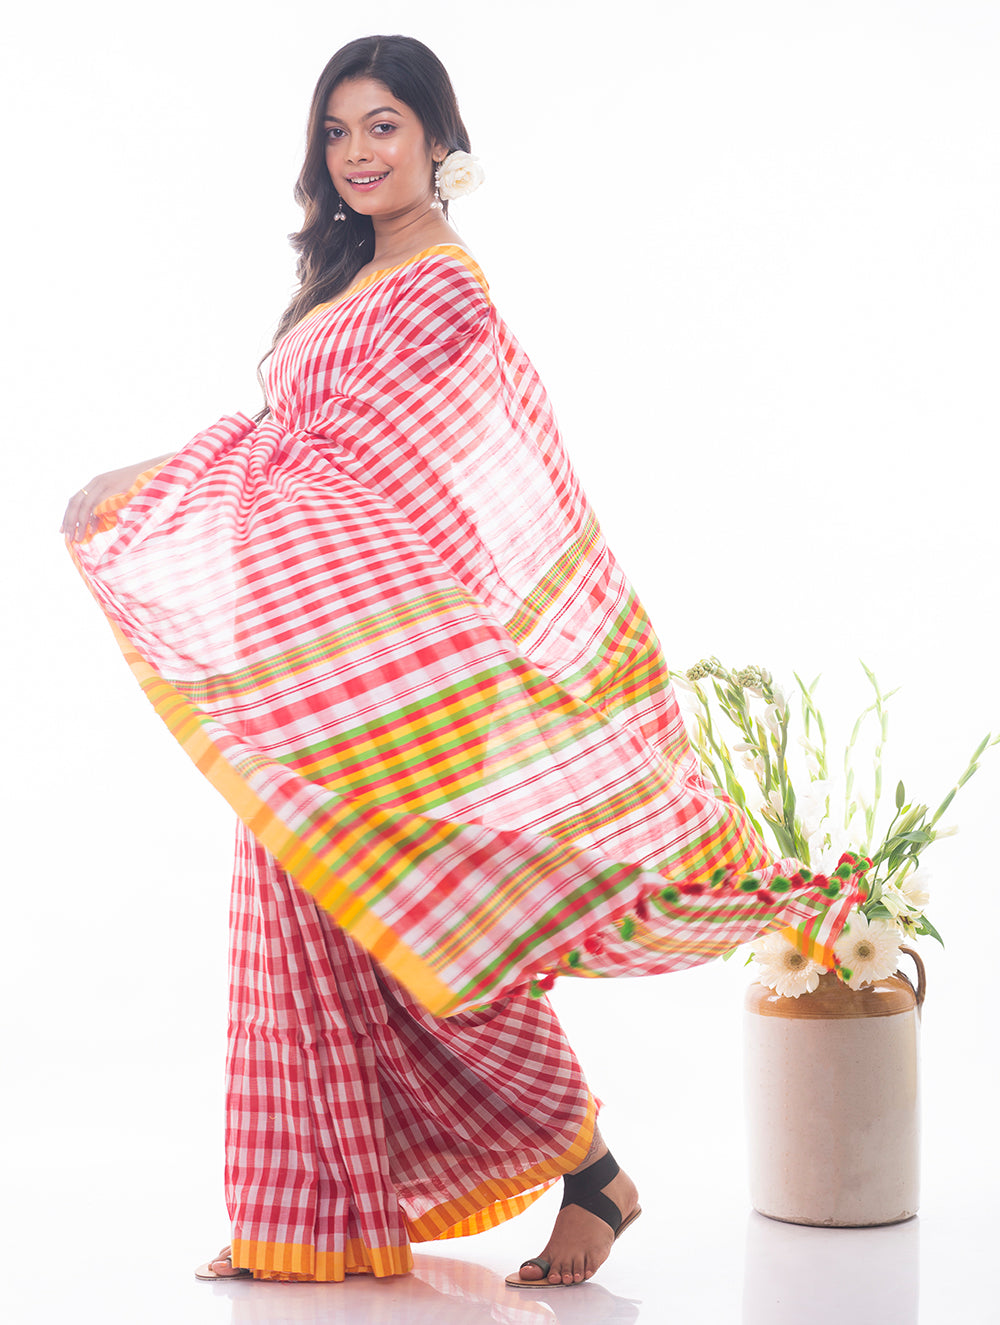 Load image into Gallery viewer, Soft Bengal Handwoven Gamcha Checked Saree - Red &amp; White